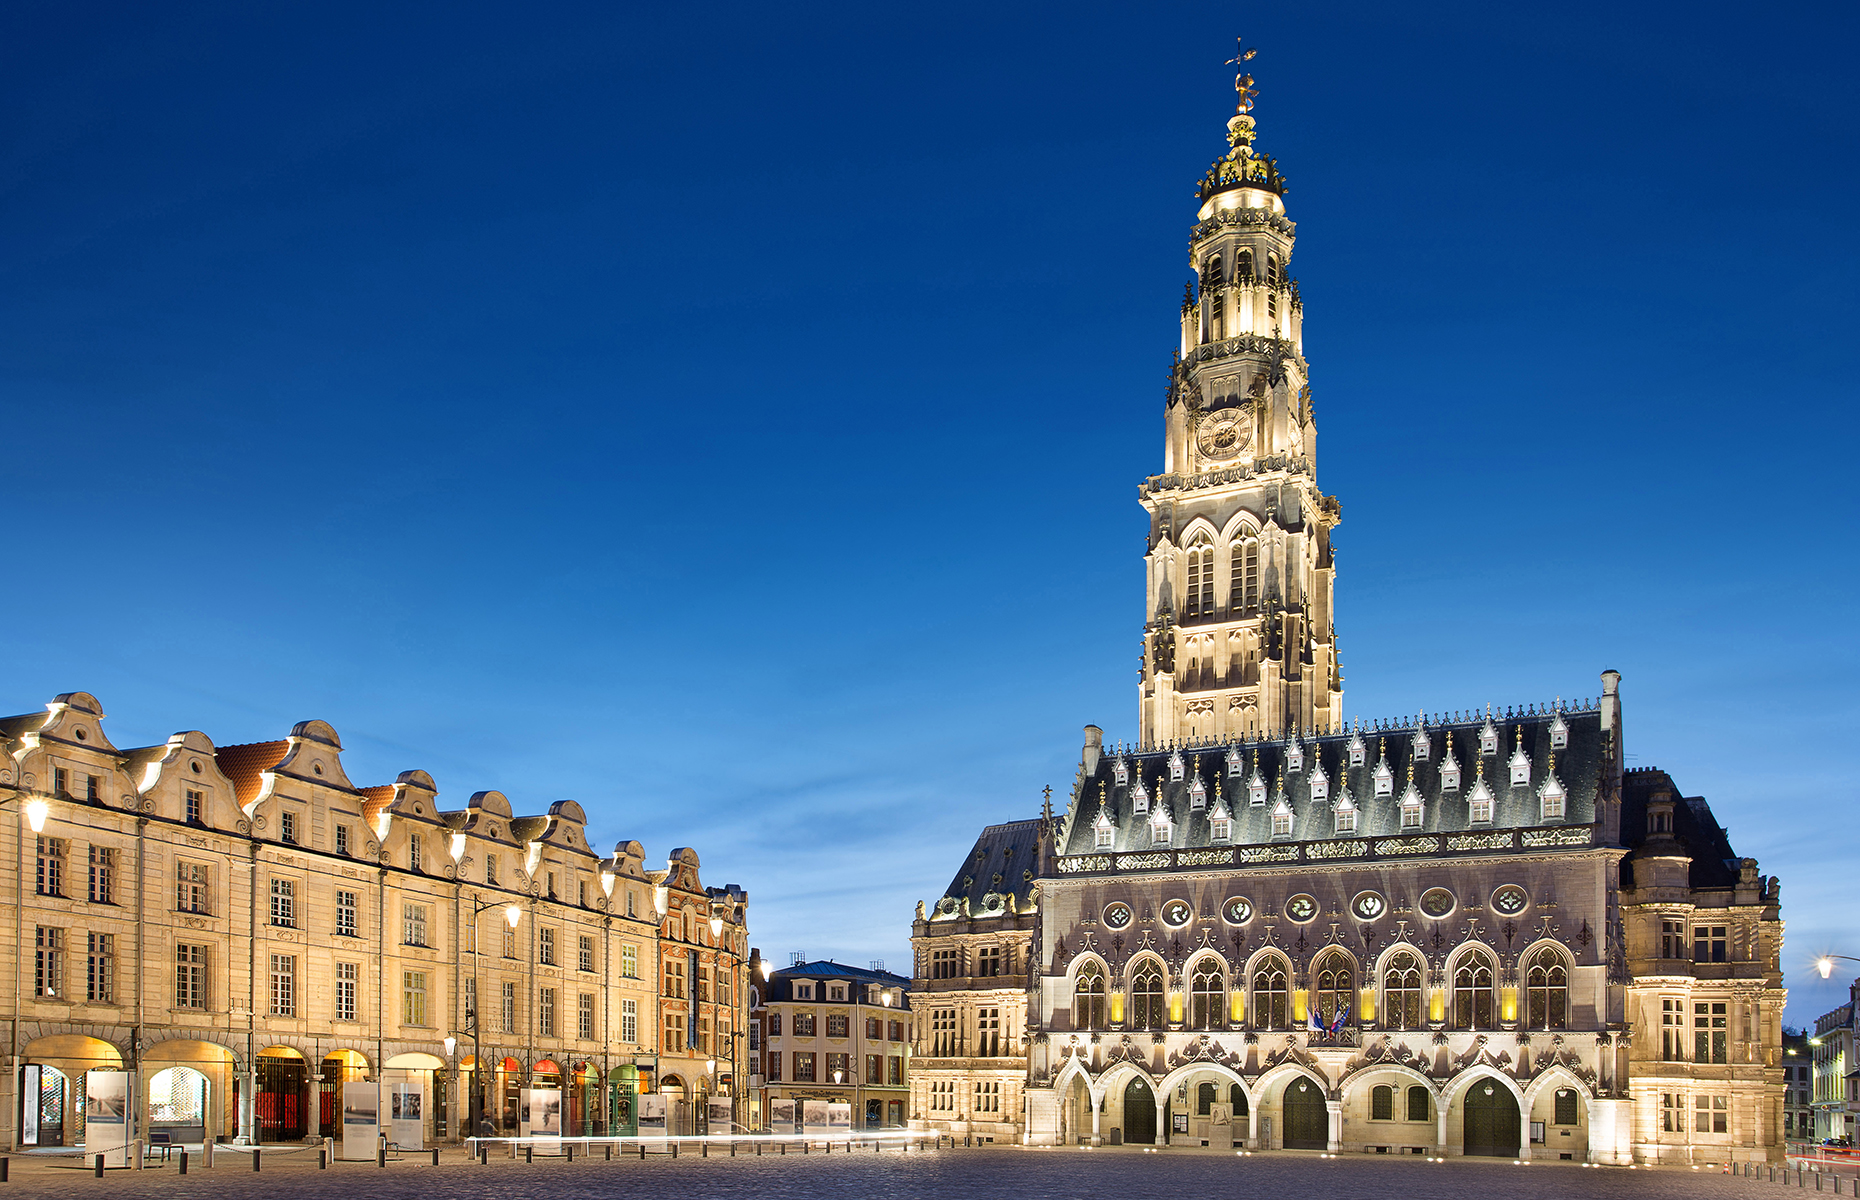 Heroes Square, Arras, France. (Image: Production Perig/Shutterstock)